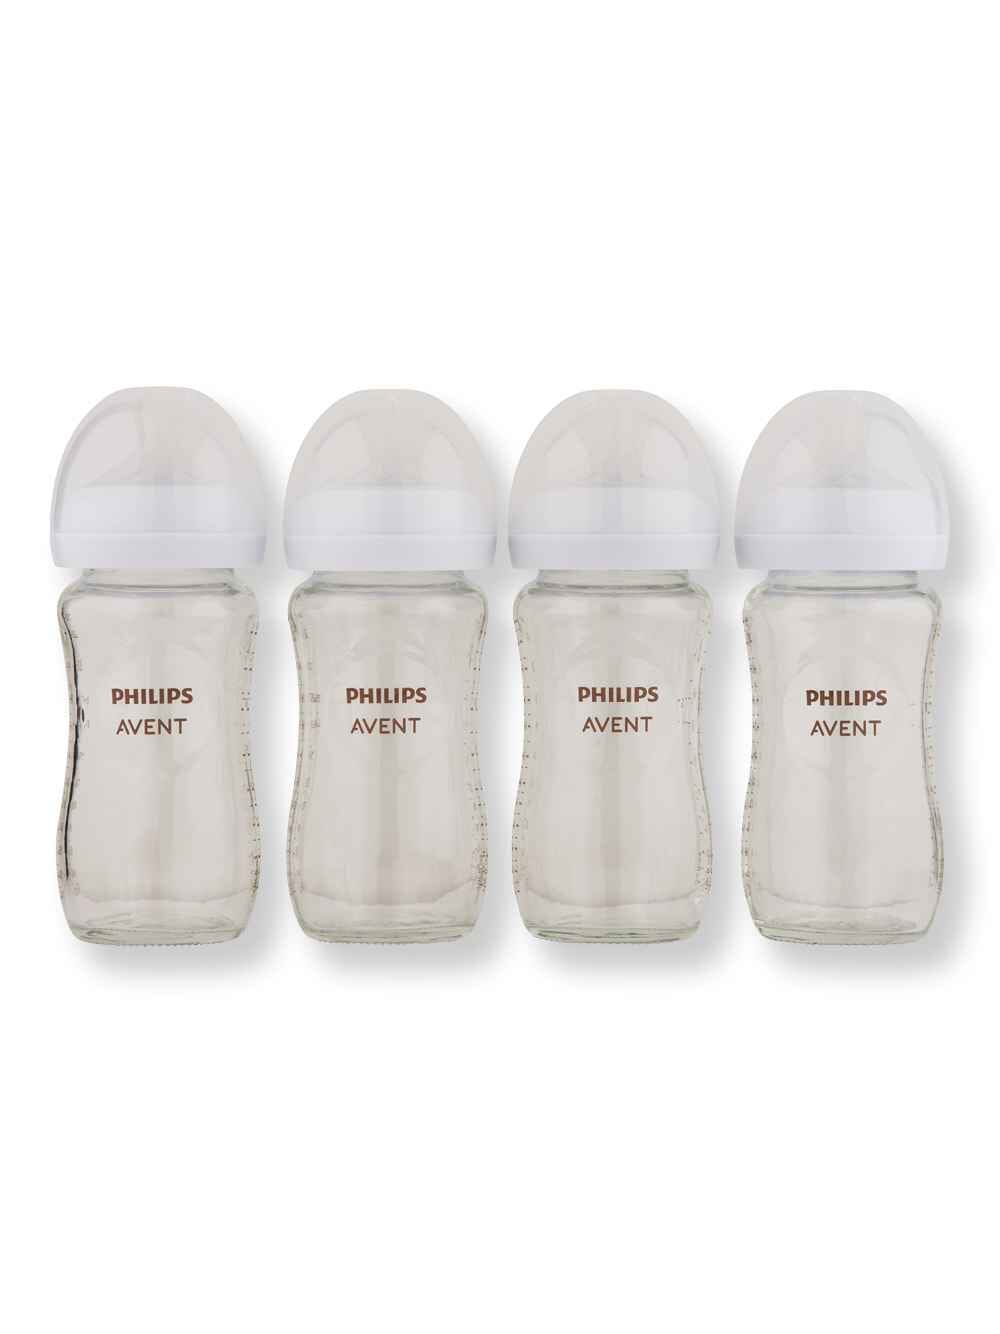 Philips Avent Philips Avent Natural Glass Baby Bottle 4 Ct 8 oz Baby Bottles 